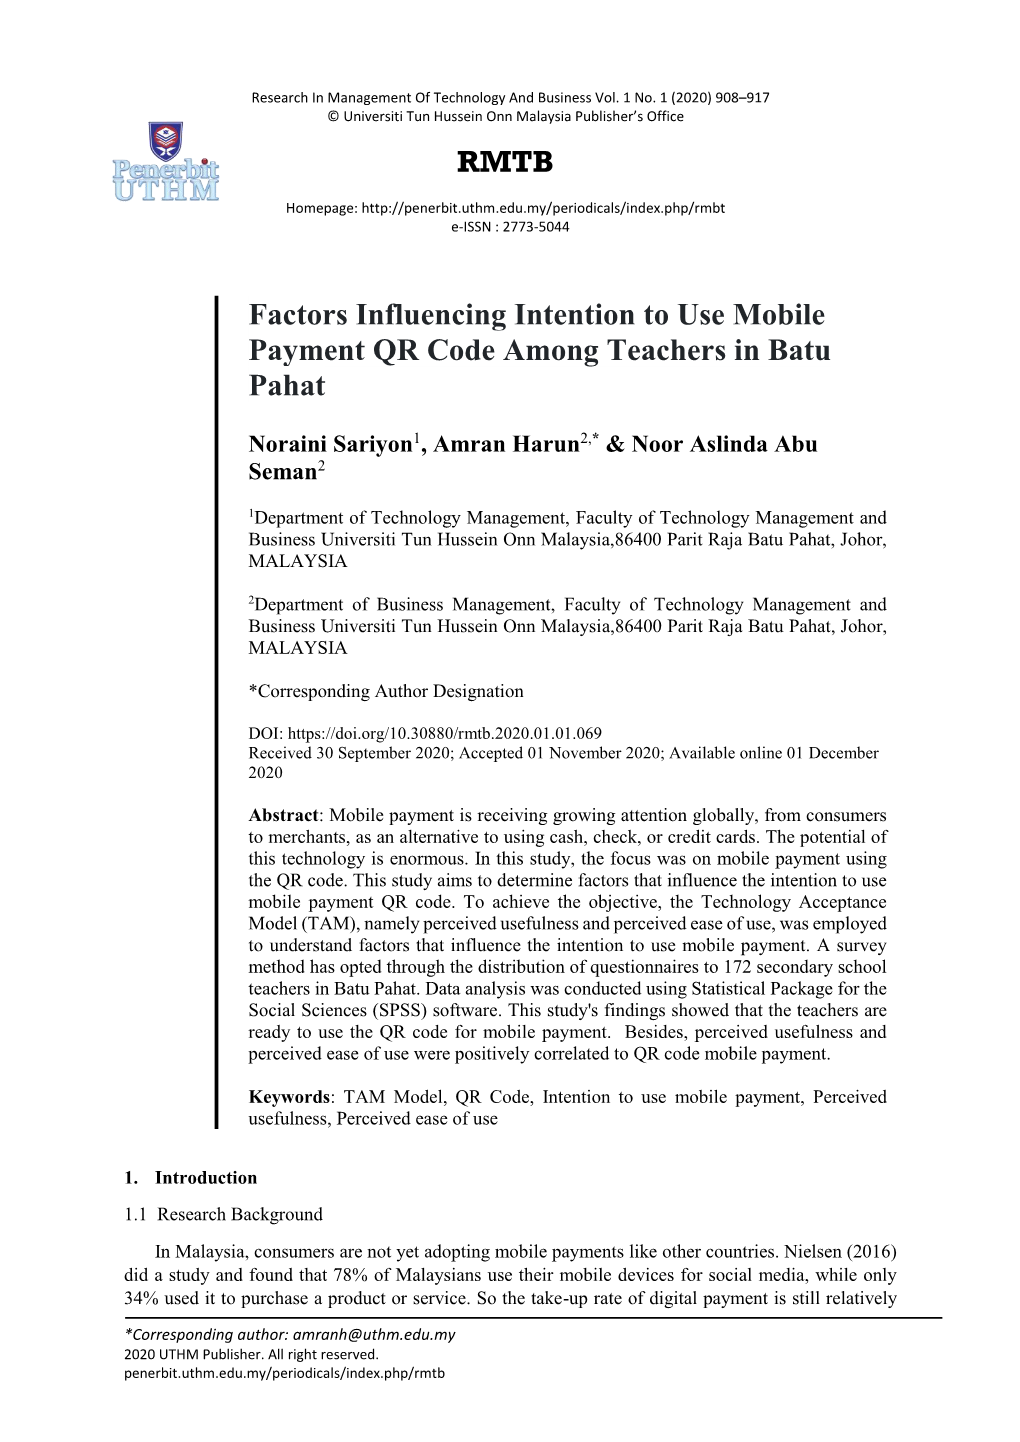 RMTB Factors Influencing Intention to Use Mobile Payment QR Code Among Teachers in Batu Pahat